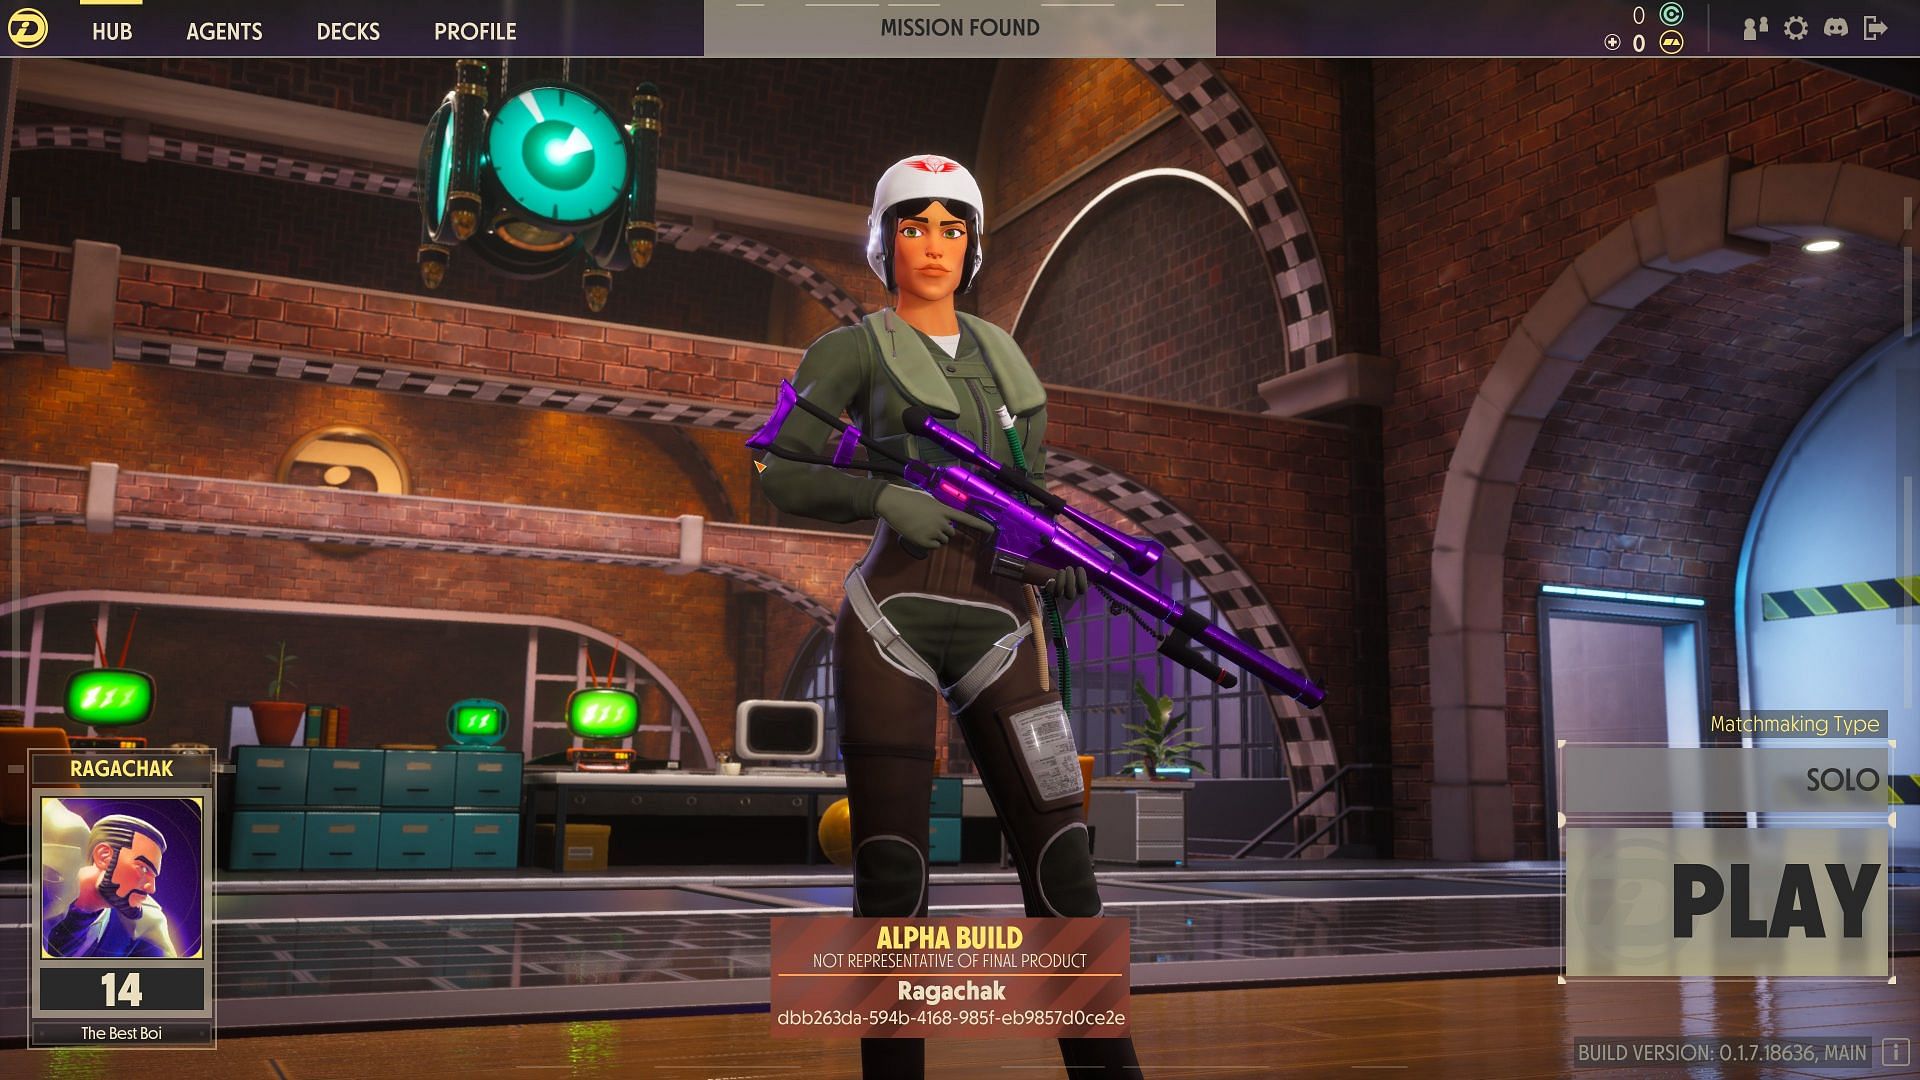 There are plenty of cool looks and gun skins for characters in the game (Image via Sweet Bandits)